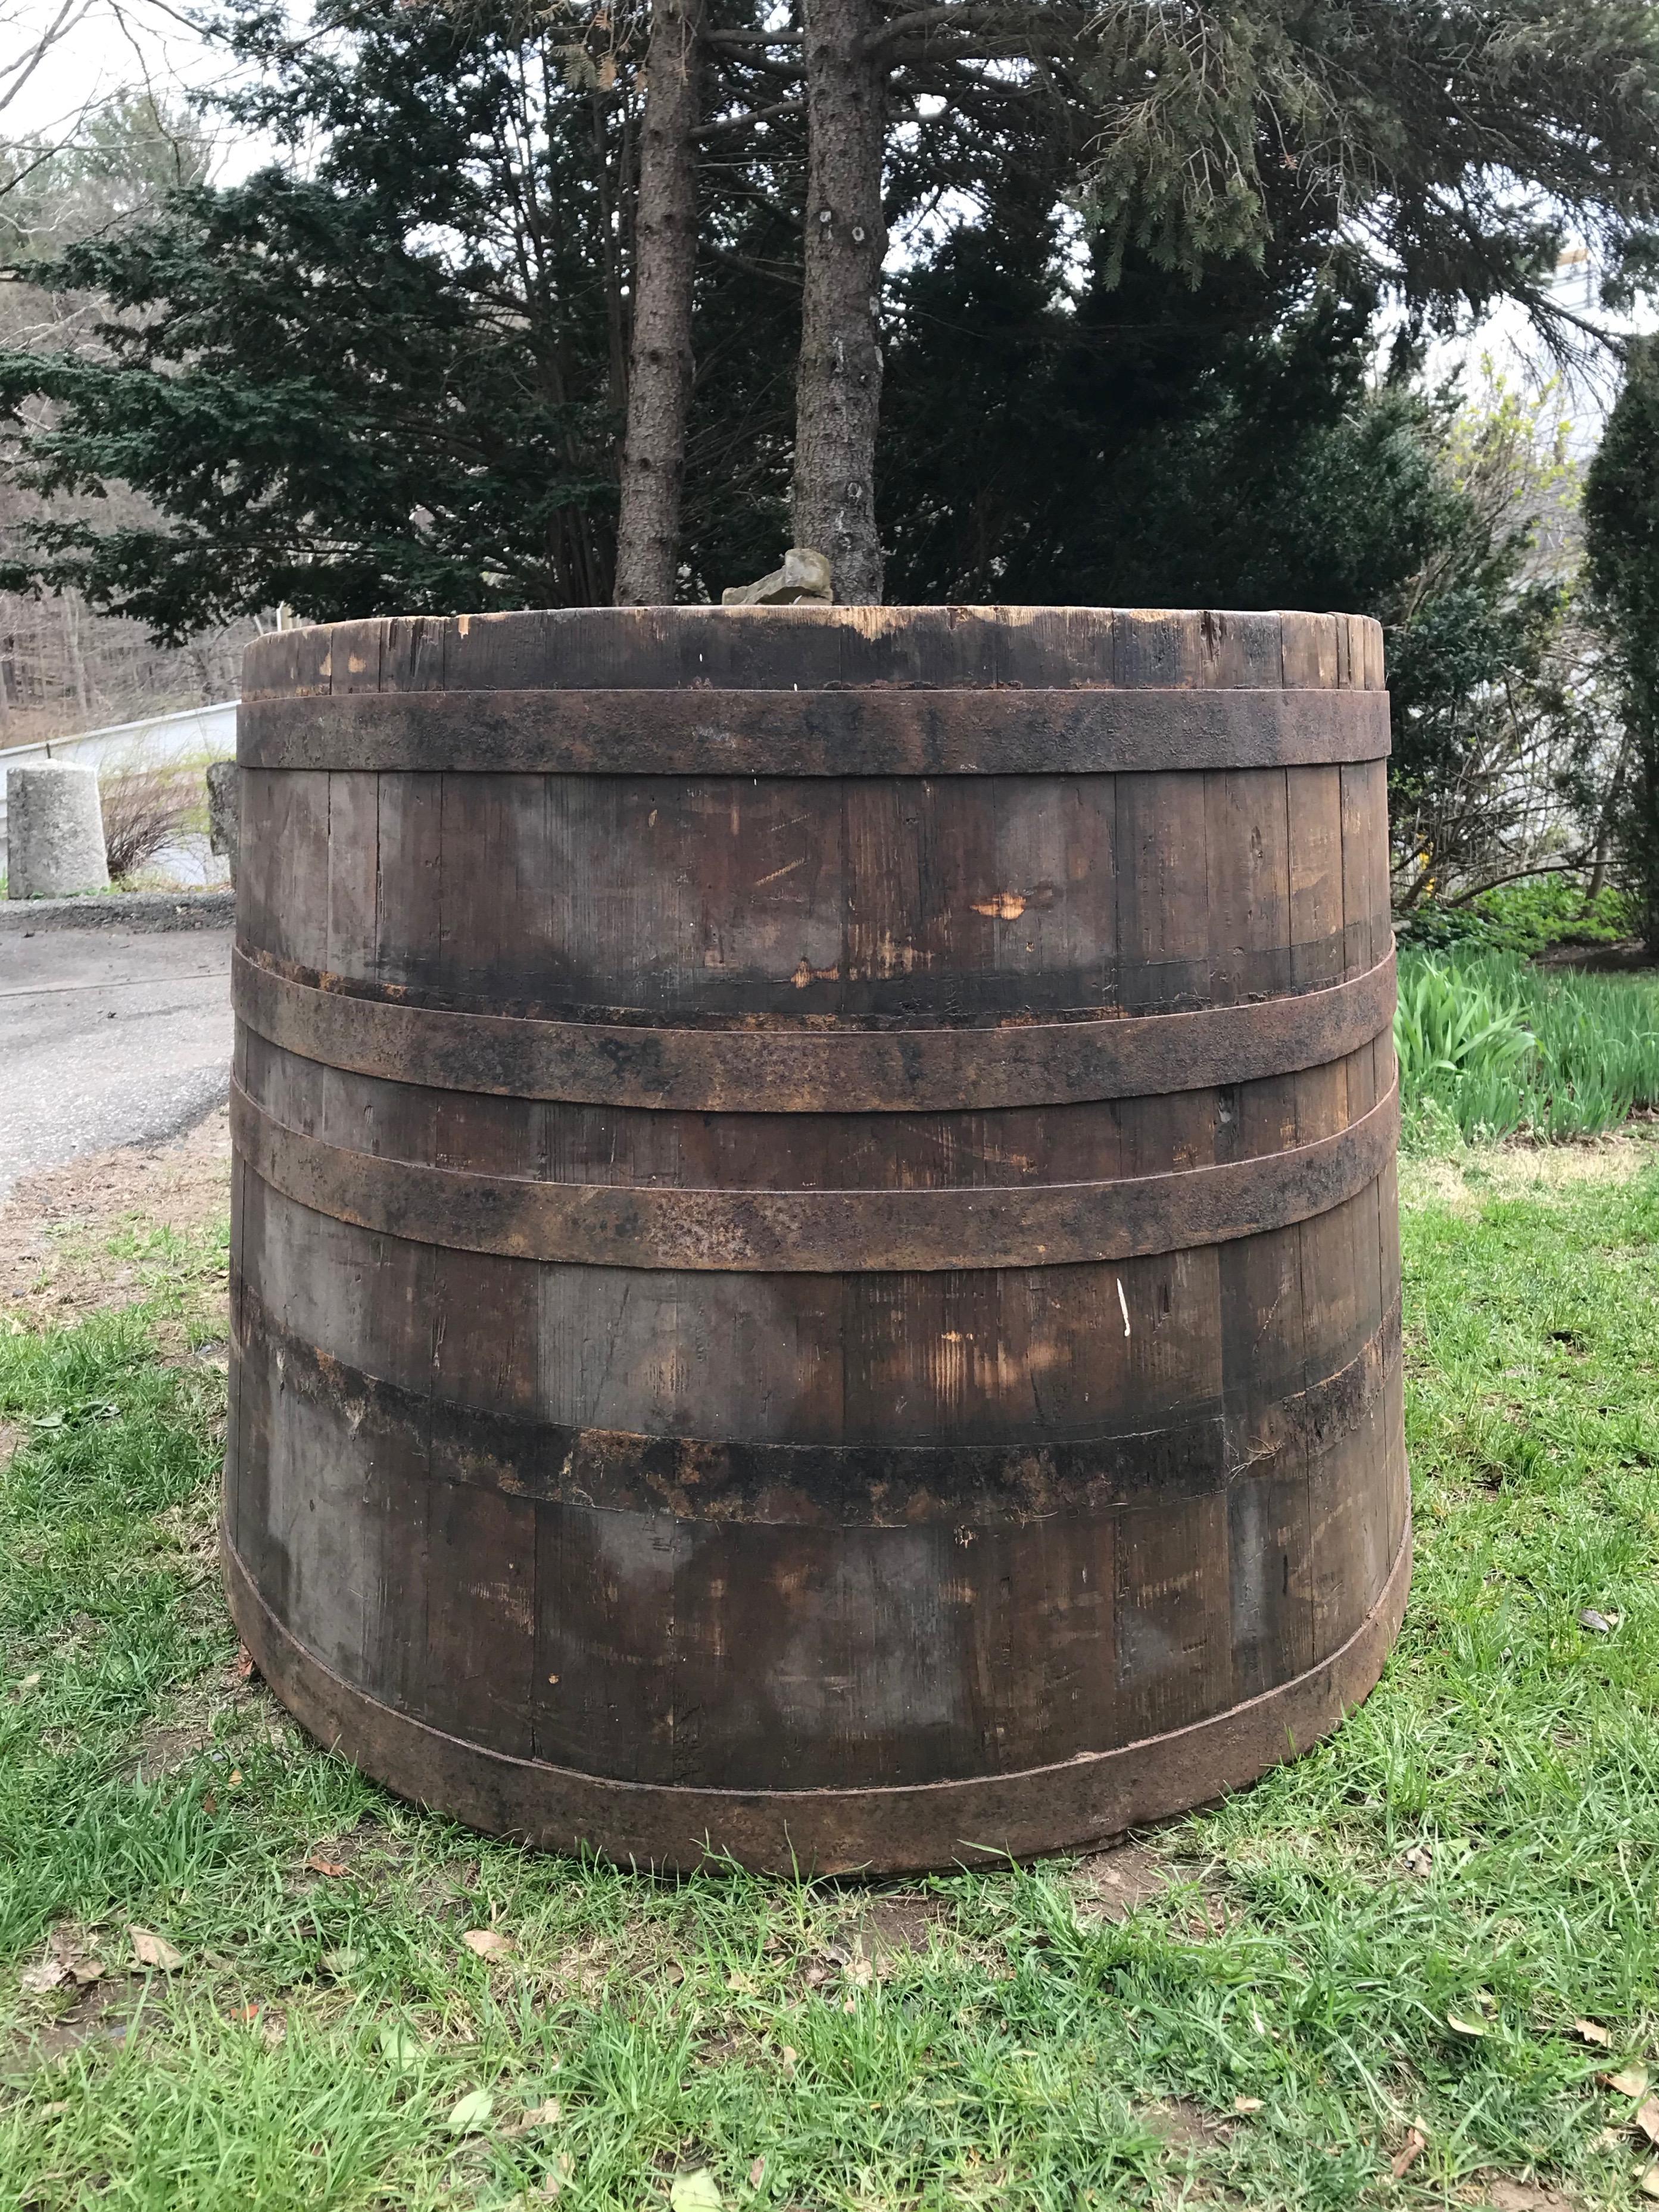 We've had plenty of wooden wine tubs before, but these are just sensational. Handmade of pine and with their original wrought iron hoops, they are in all original, as-found condition with no drain holes as of now (but we can drill them if you like).